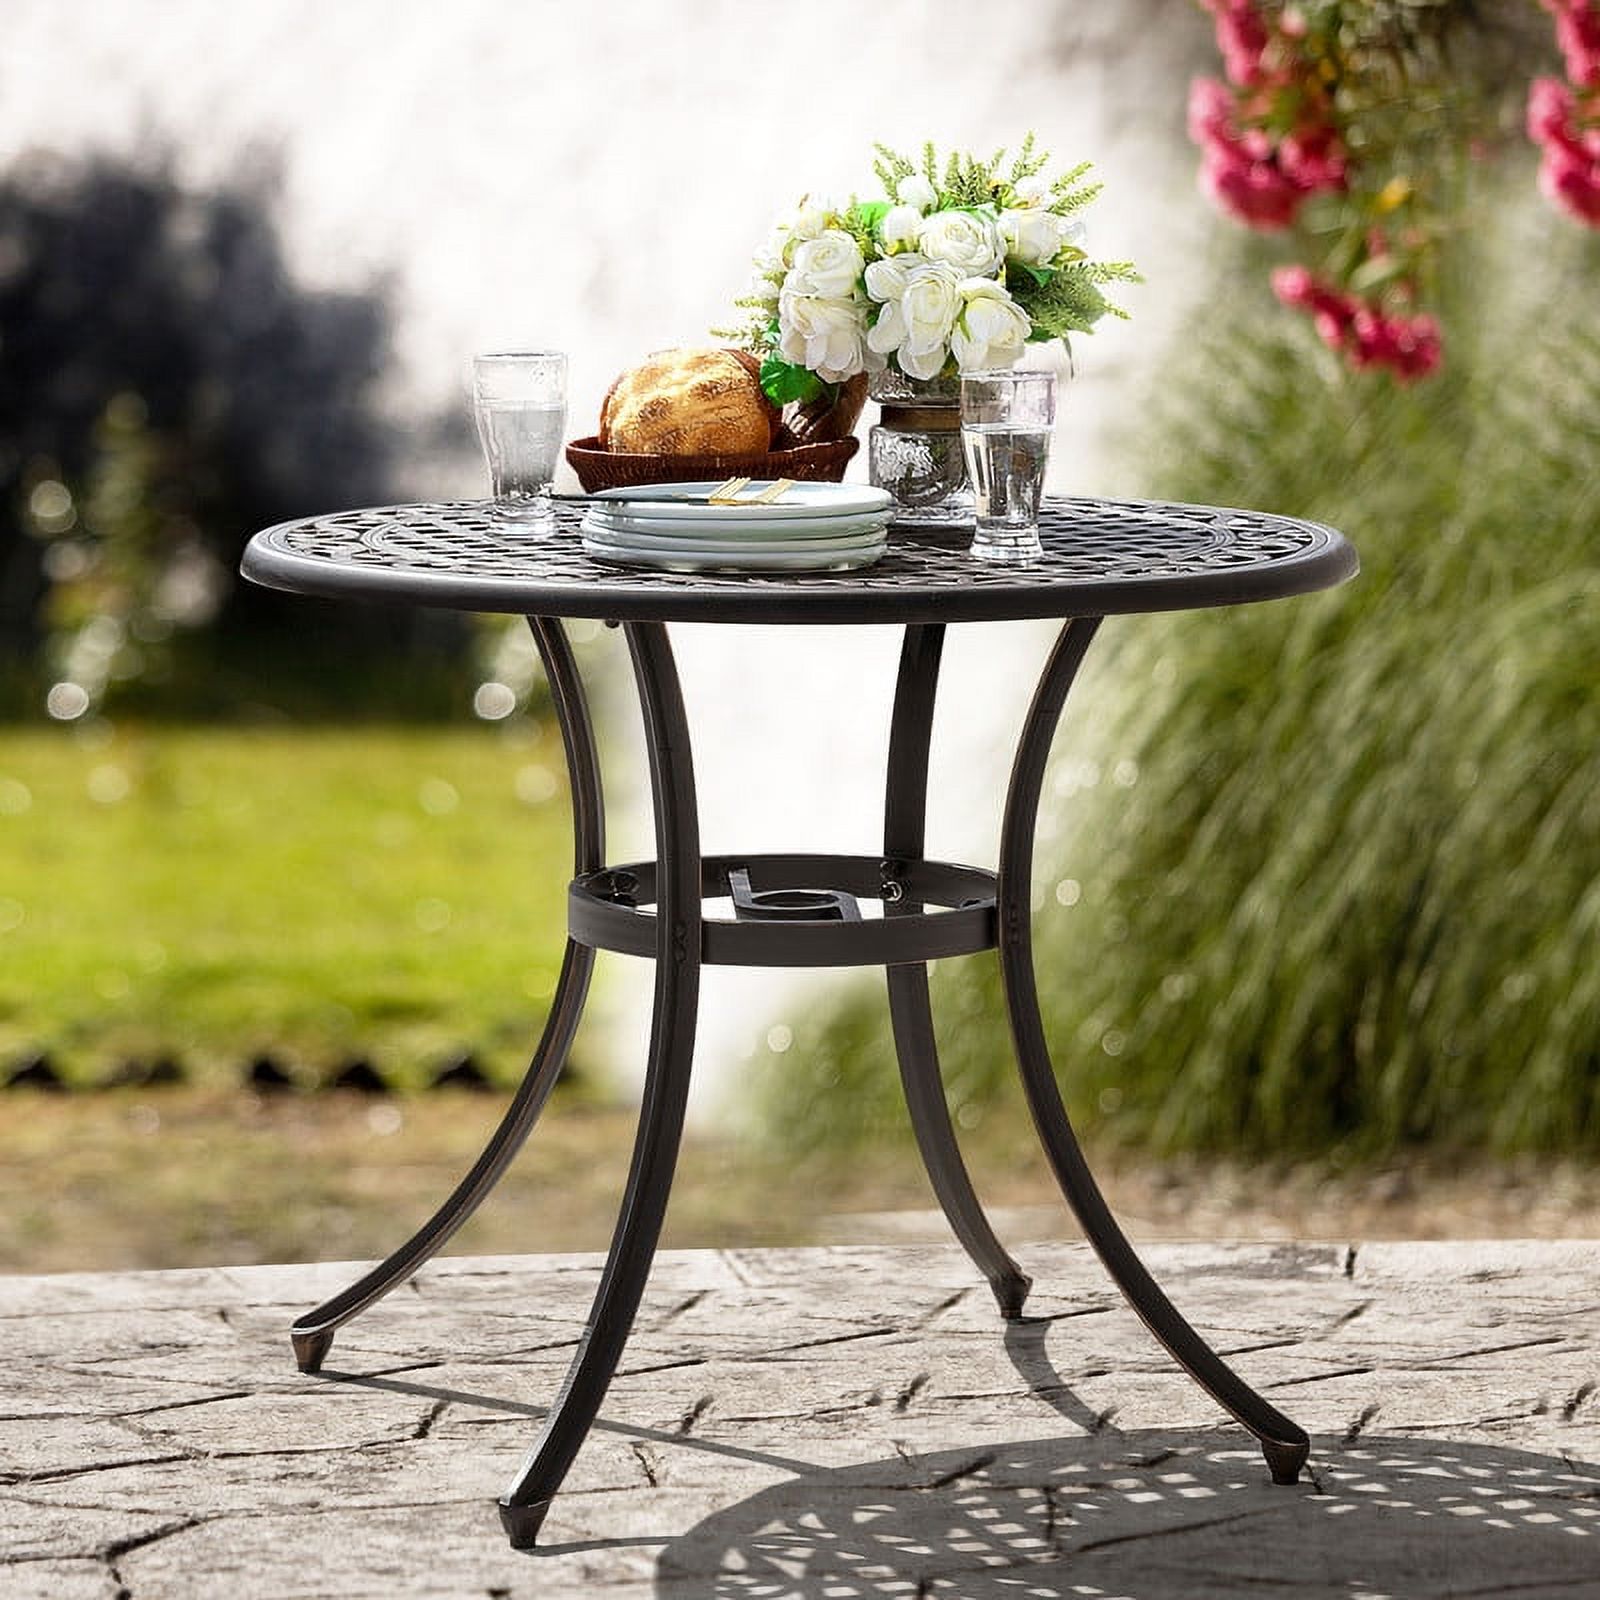 Nuu Garden 36" Cast Aluminum Outdoor Dining Table Round Patio Bistro Dining Table with Umbrella Hole,Black with Antique Bronze at The Edge - image 5 of 9